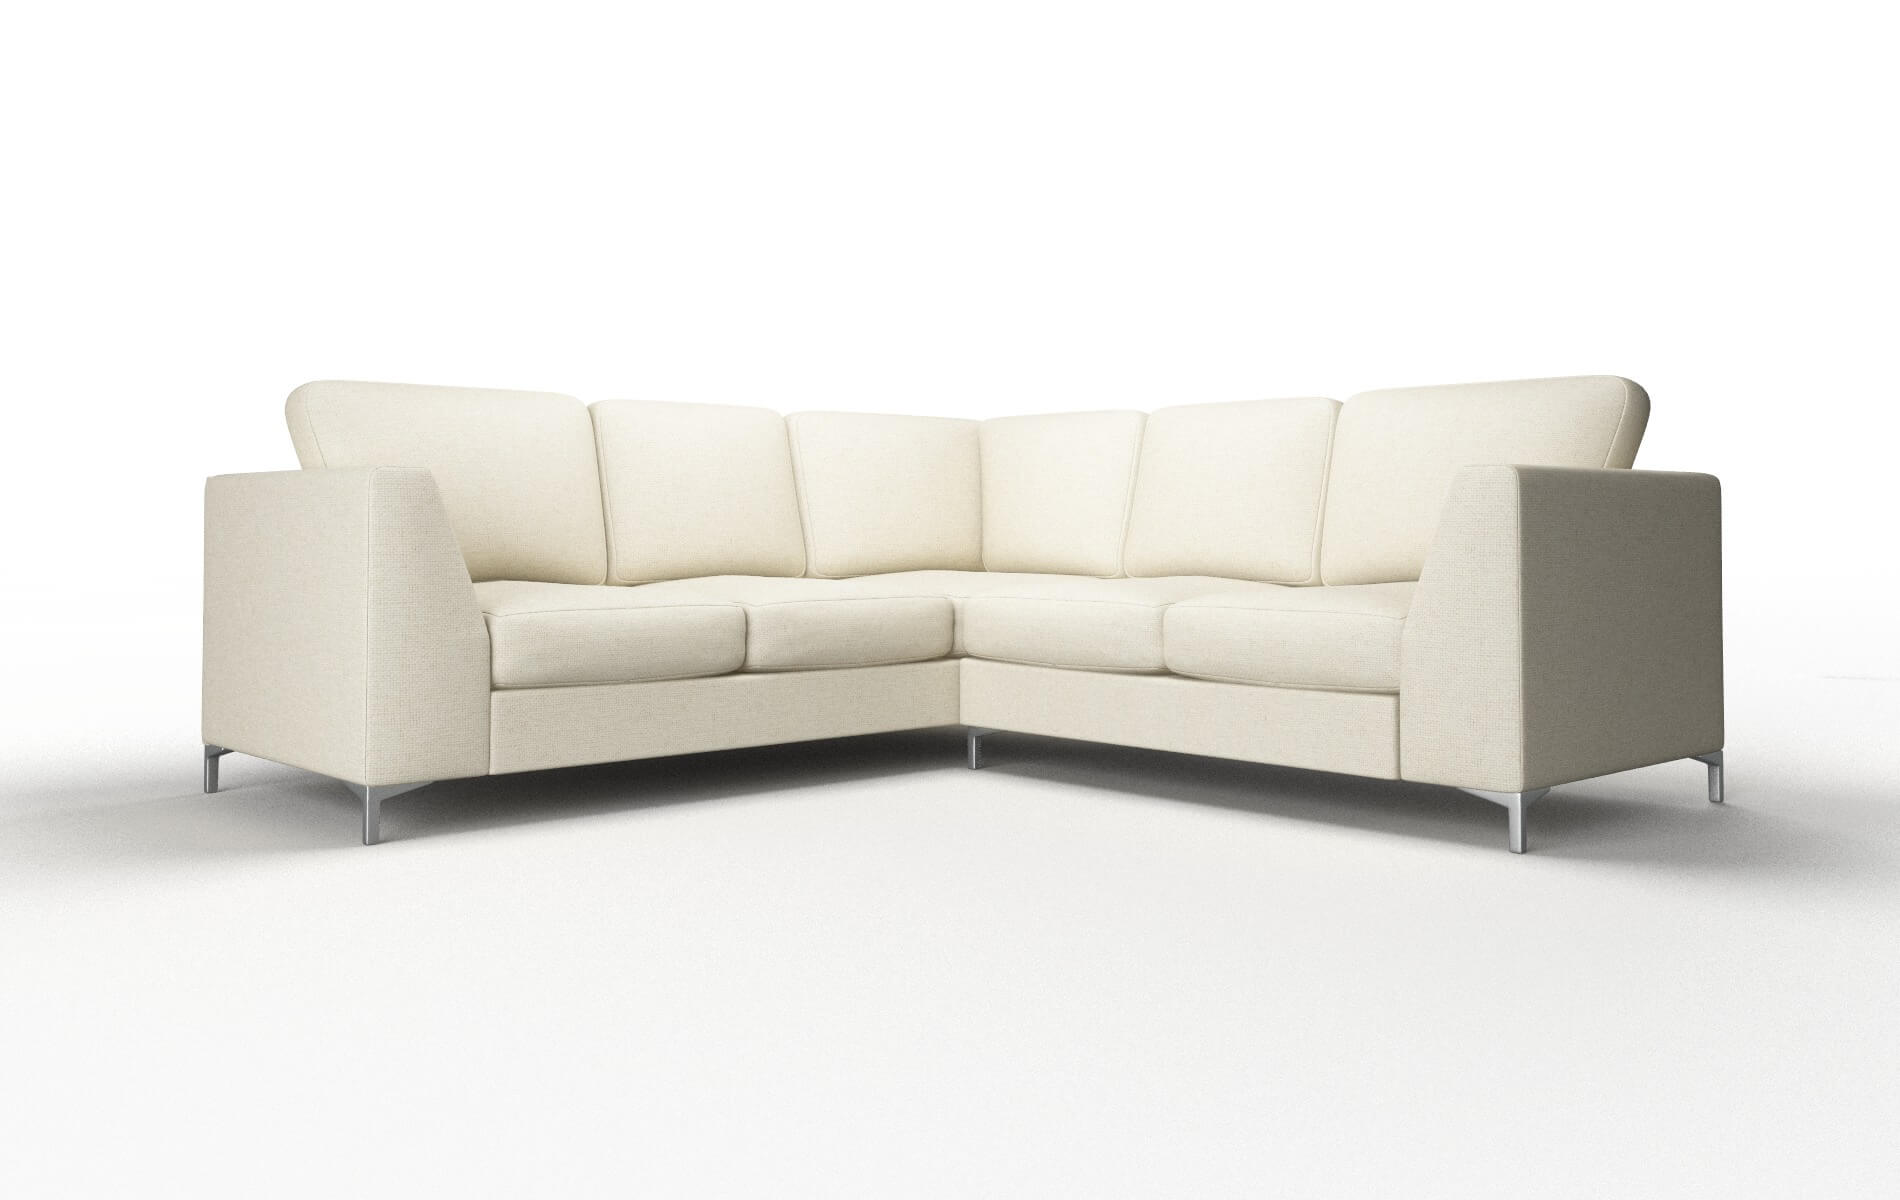 Royal Redondo Oyster Sectional metal legs